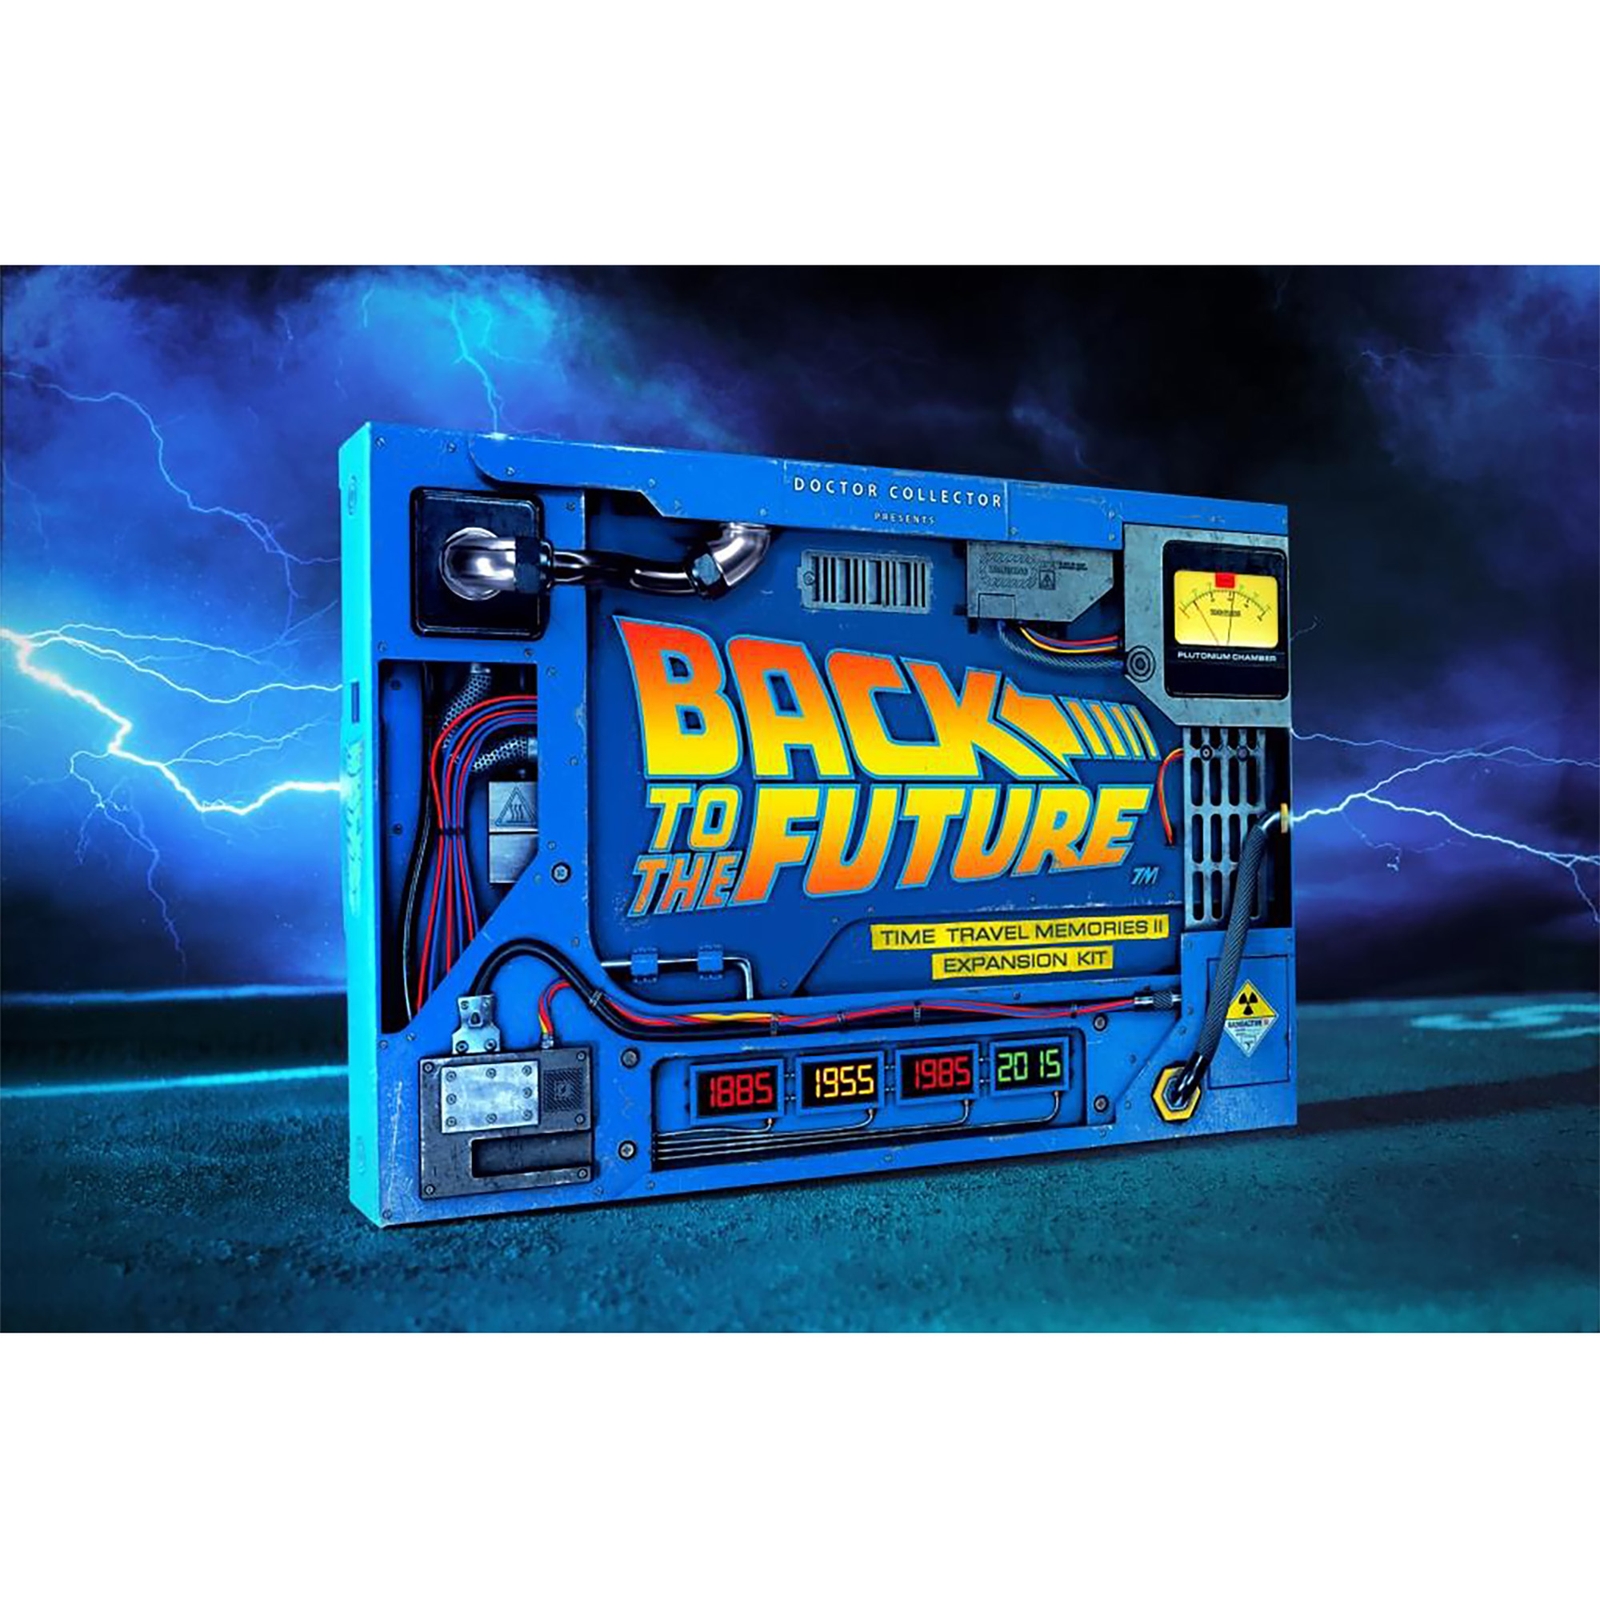 Photos - Other Souvenirs Doctor Collector Back to the Future Time Travel Memories II Expansion Kit